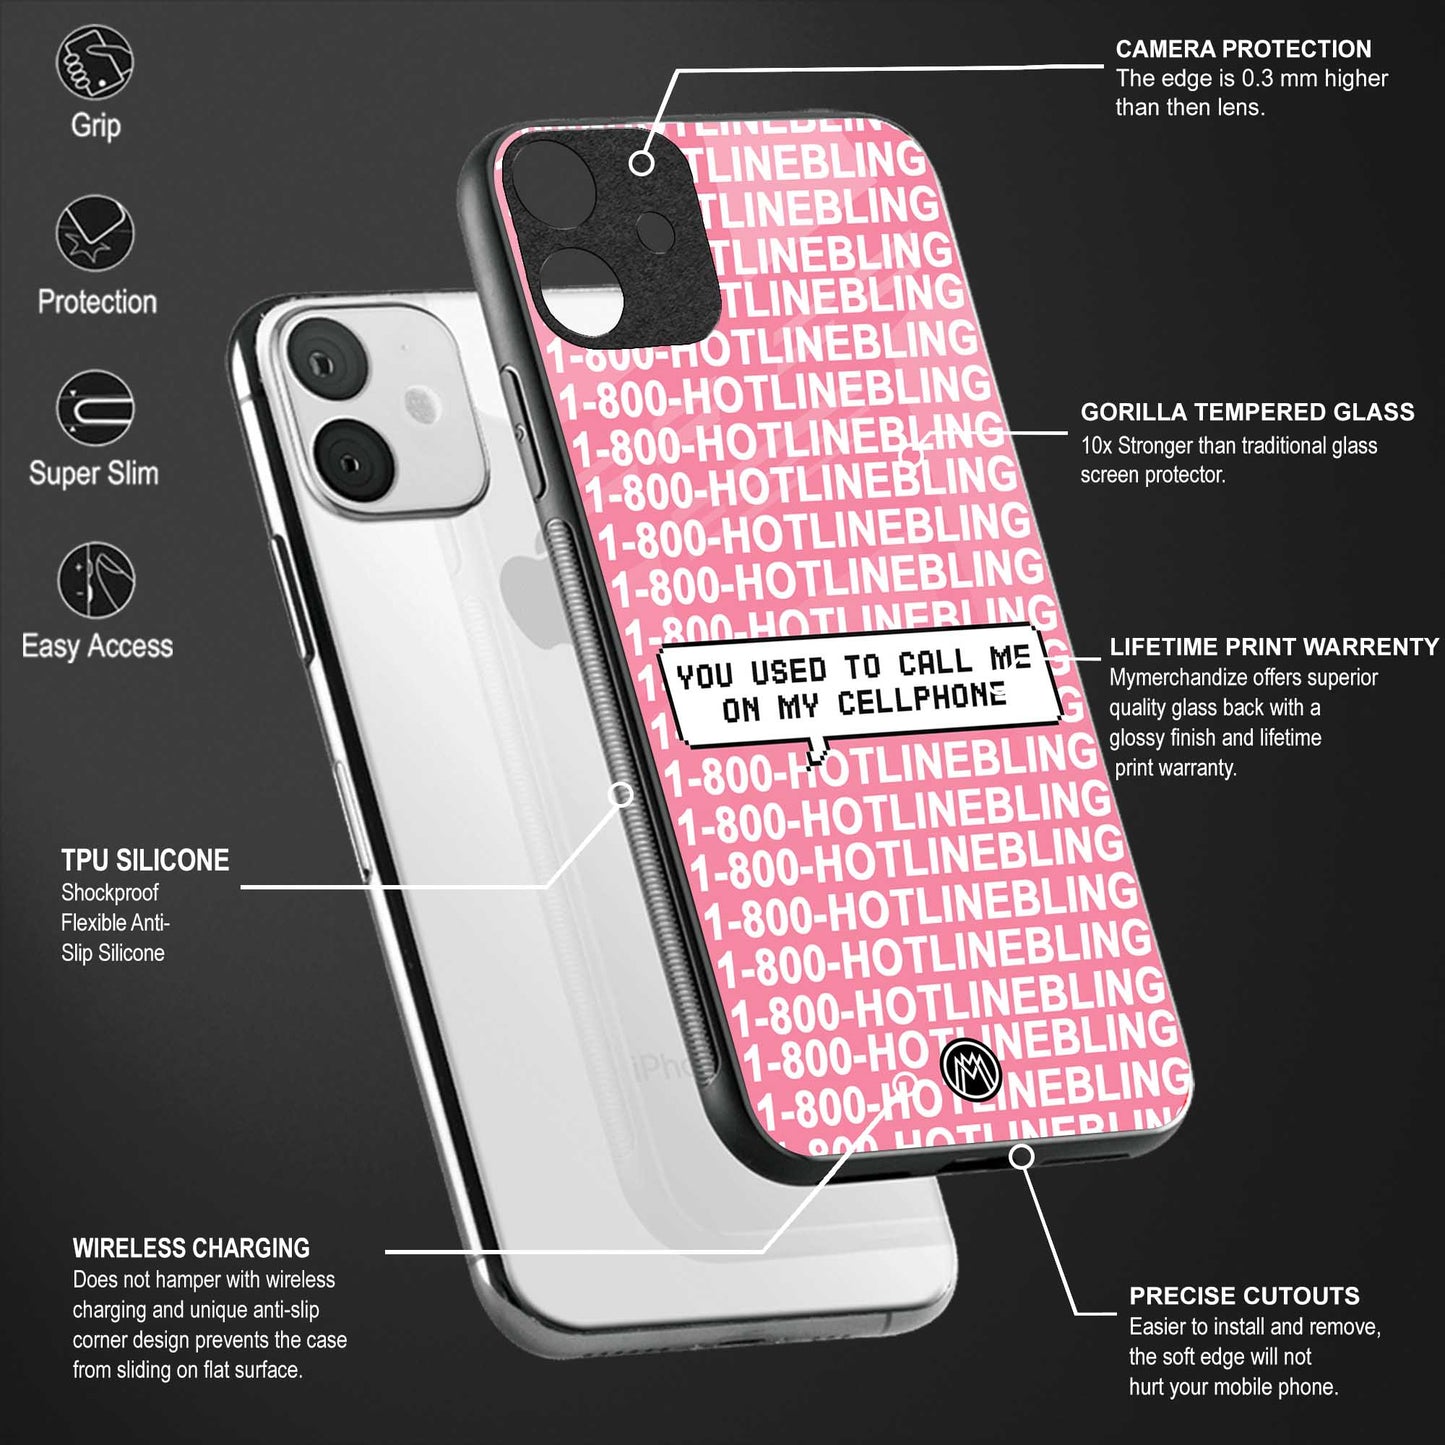 1800 hotline bling phone cover for samsung galaxy m11 